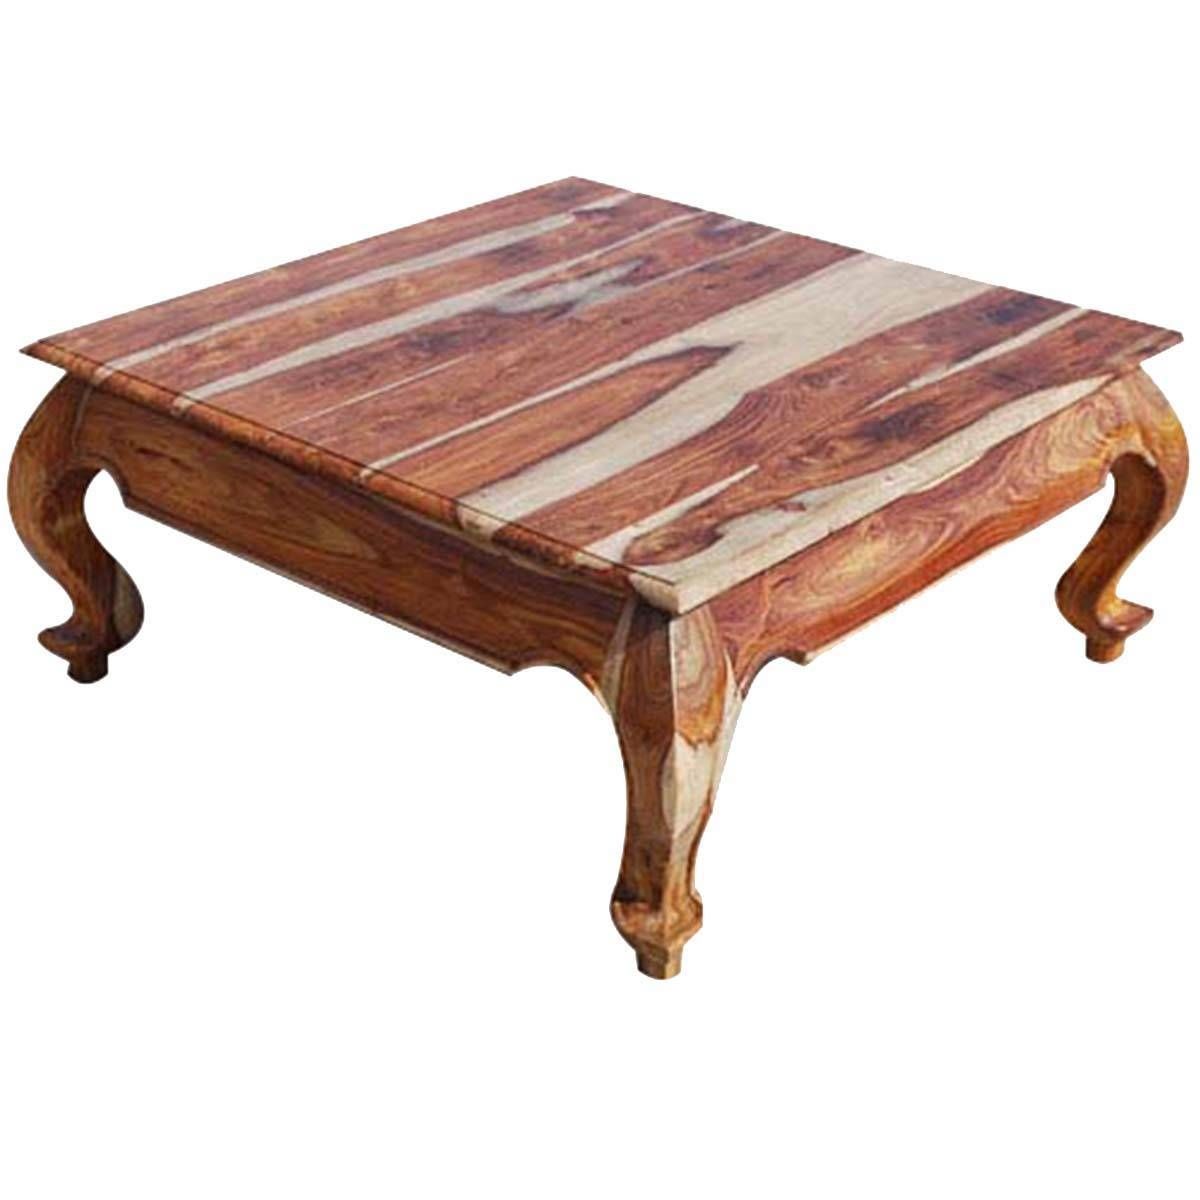 Large Square Solid Wood Opium Coffee Table Throughout Large Square Wood Coffee Tables (View 12 of 30)